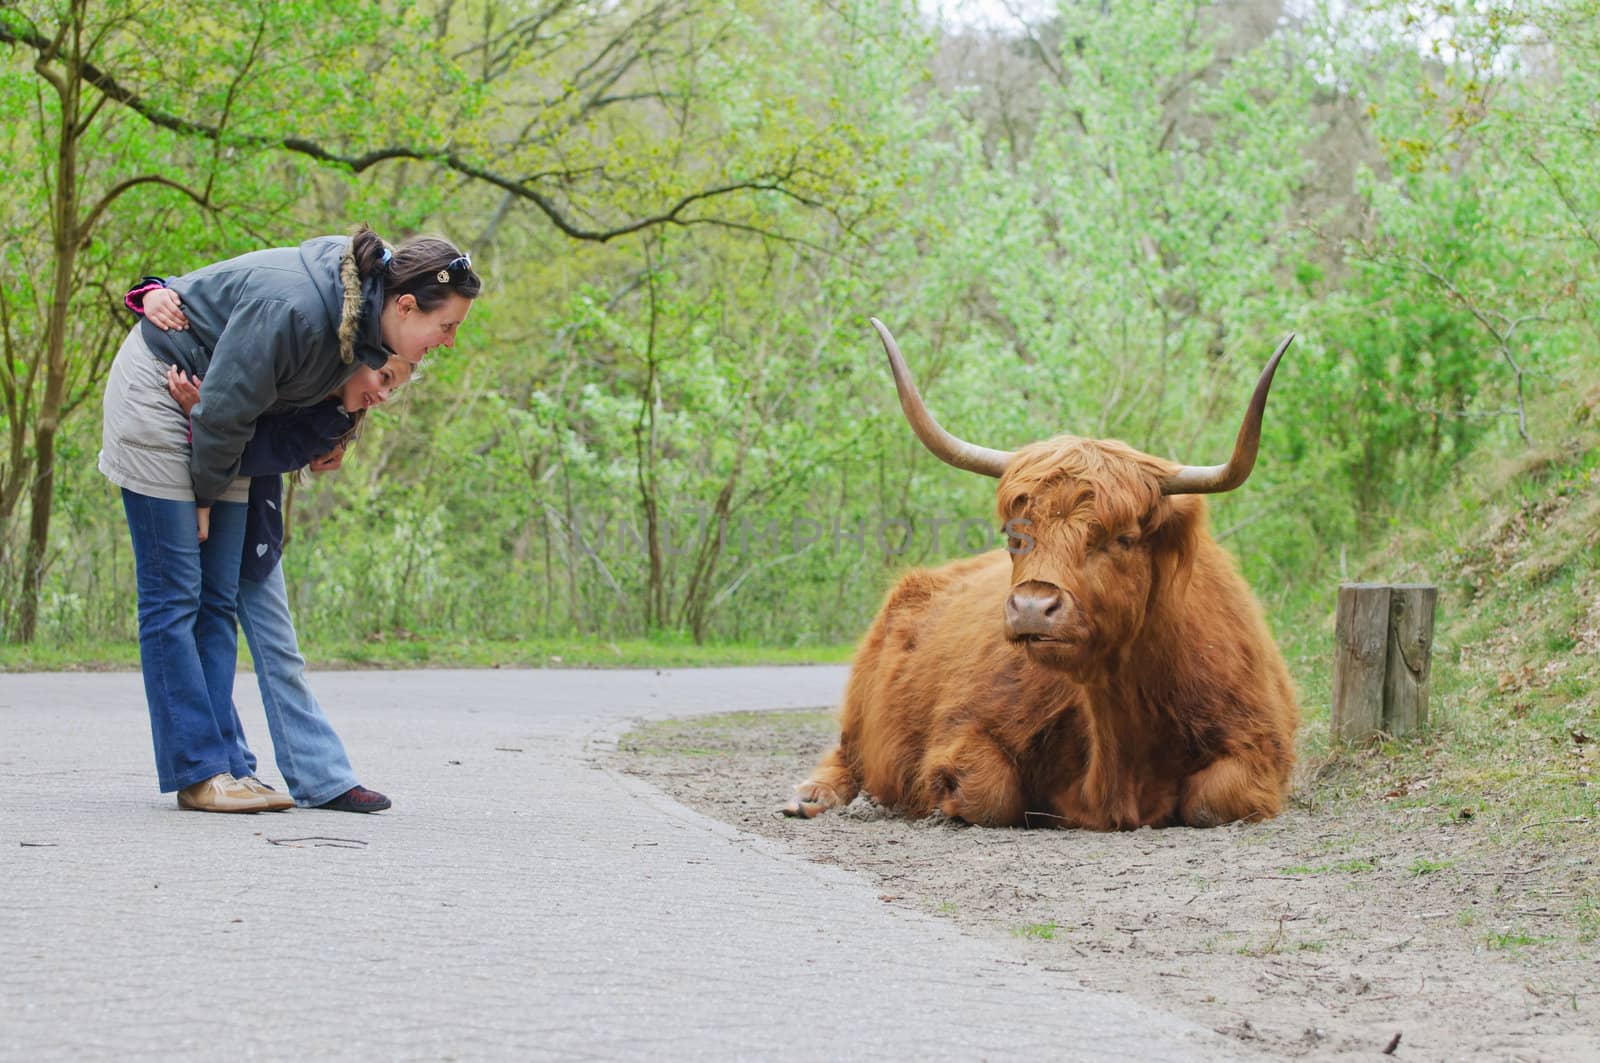 Mom and daughter for a walk watching Highland Bull by maxoliki